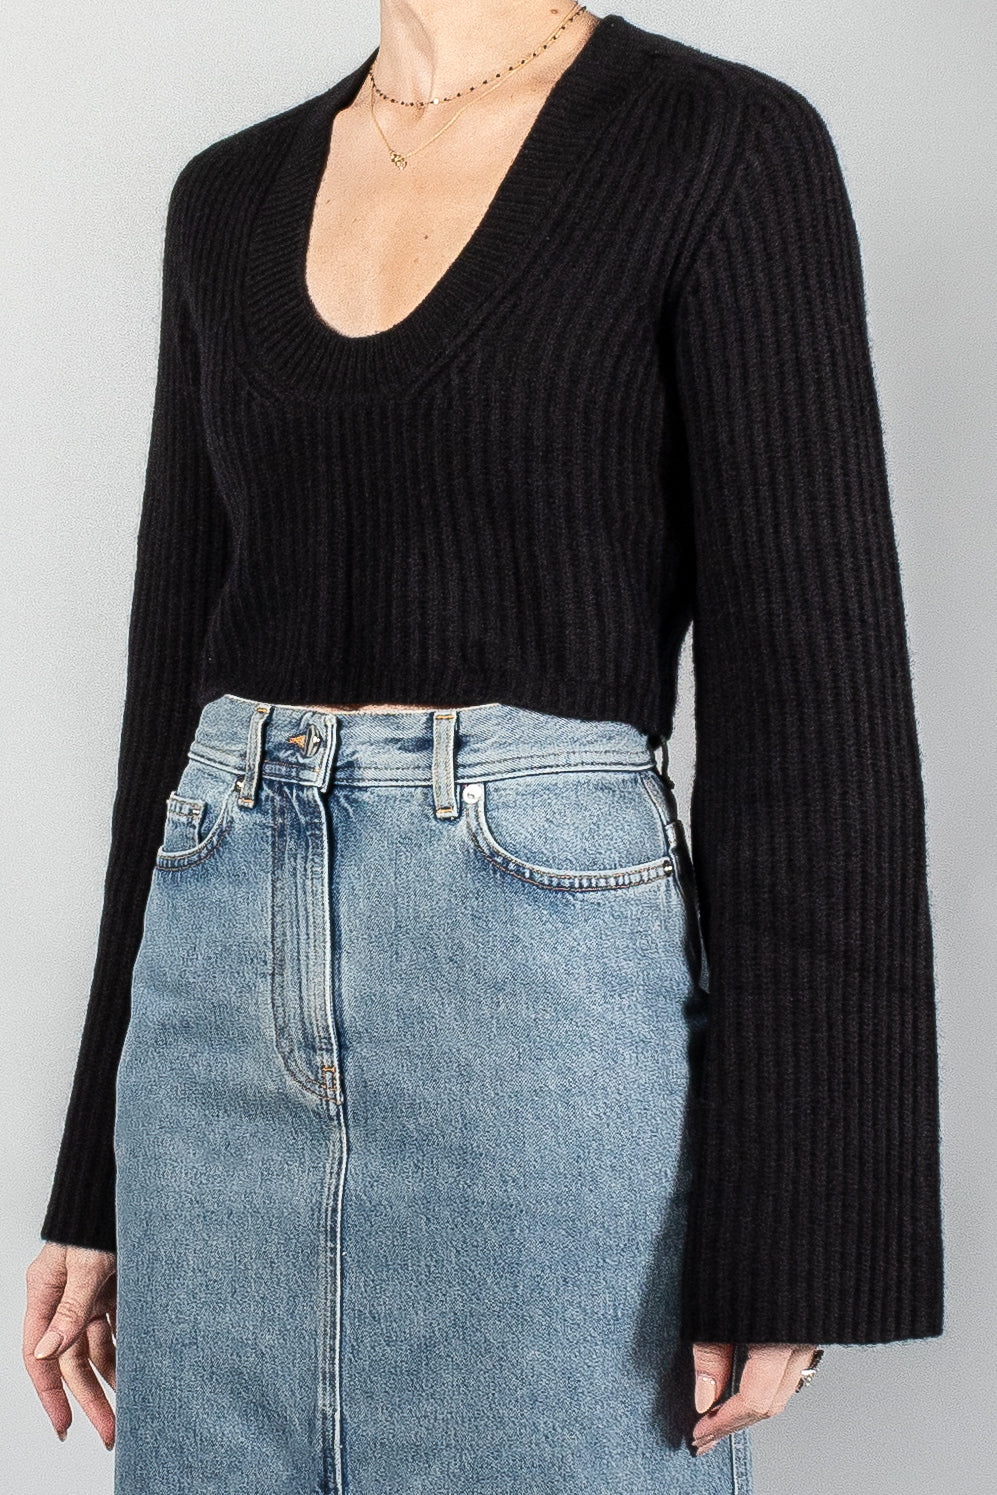 Loulou Studio Chante Sweater-Knitwear-Misch-Boutique-Vancouver-Canada-misch.ca